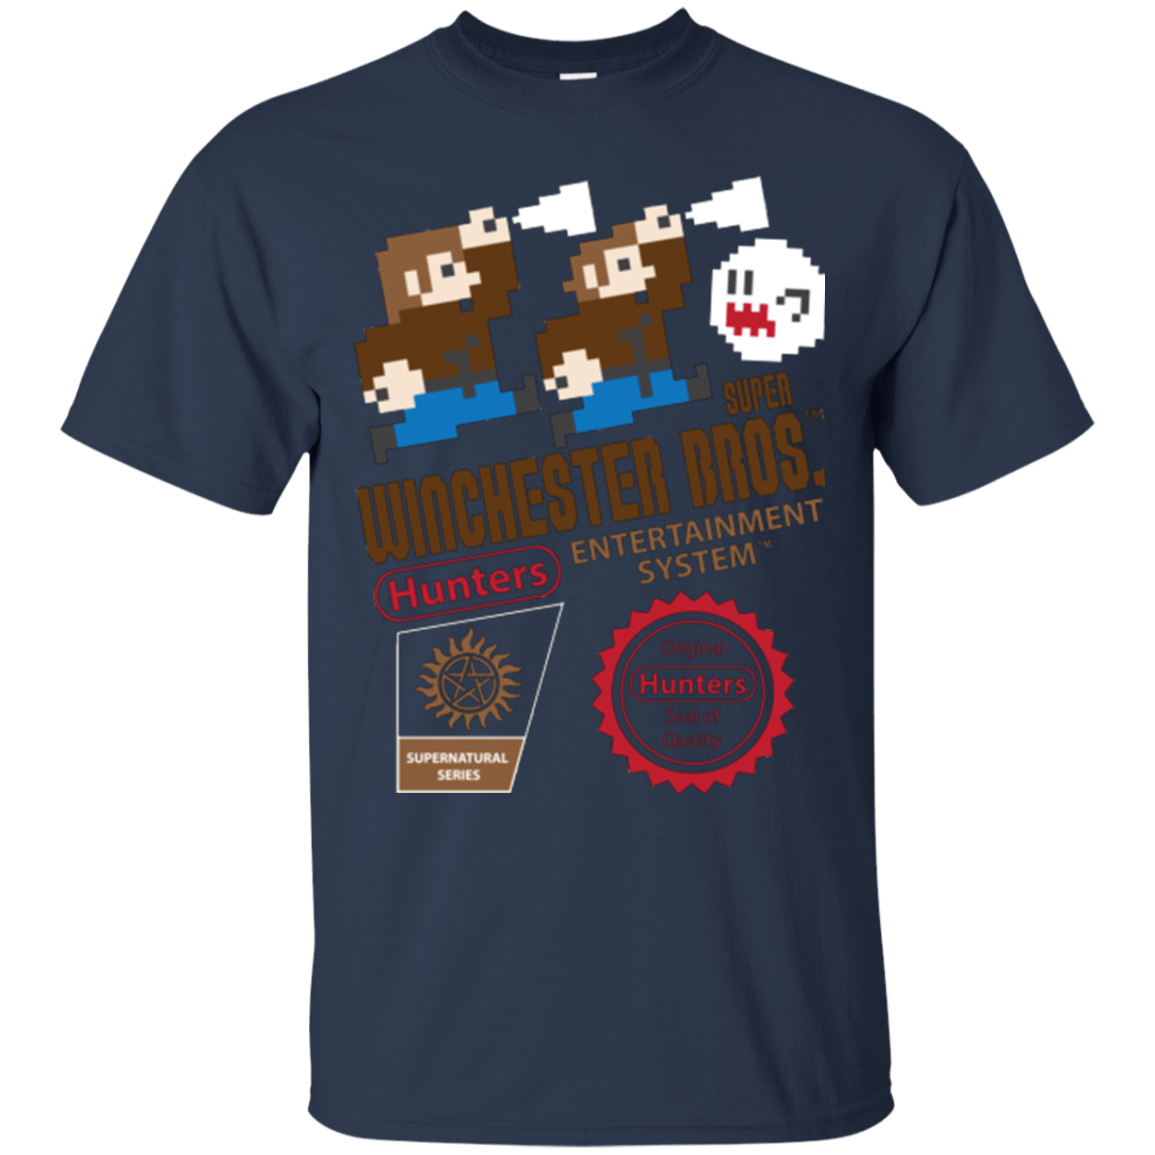 T-Shirts Navy / Small Super Winchester Bros T-Shirt